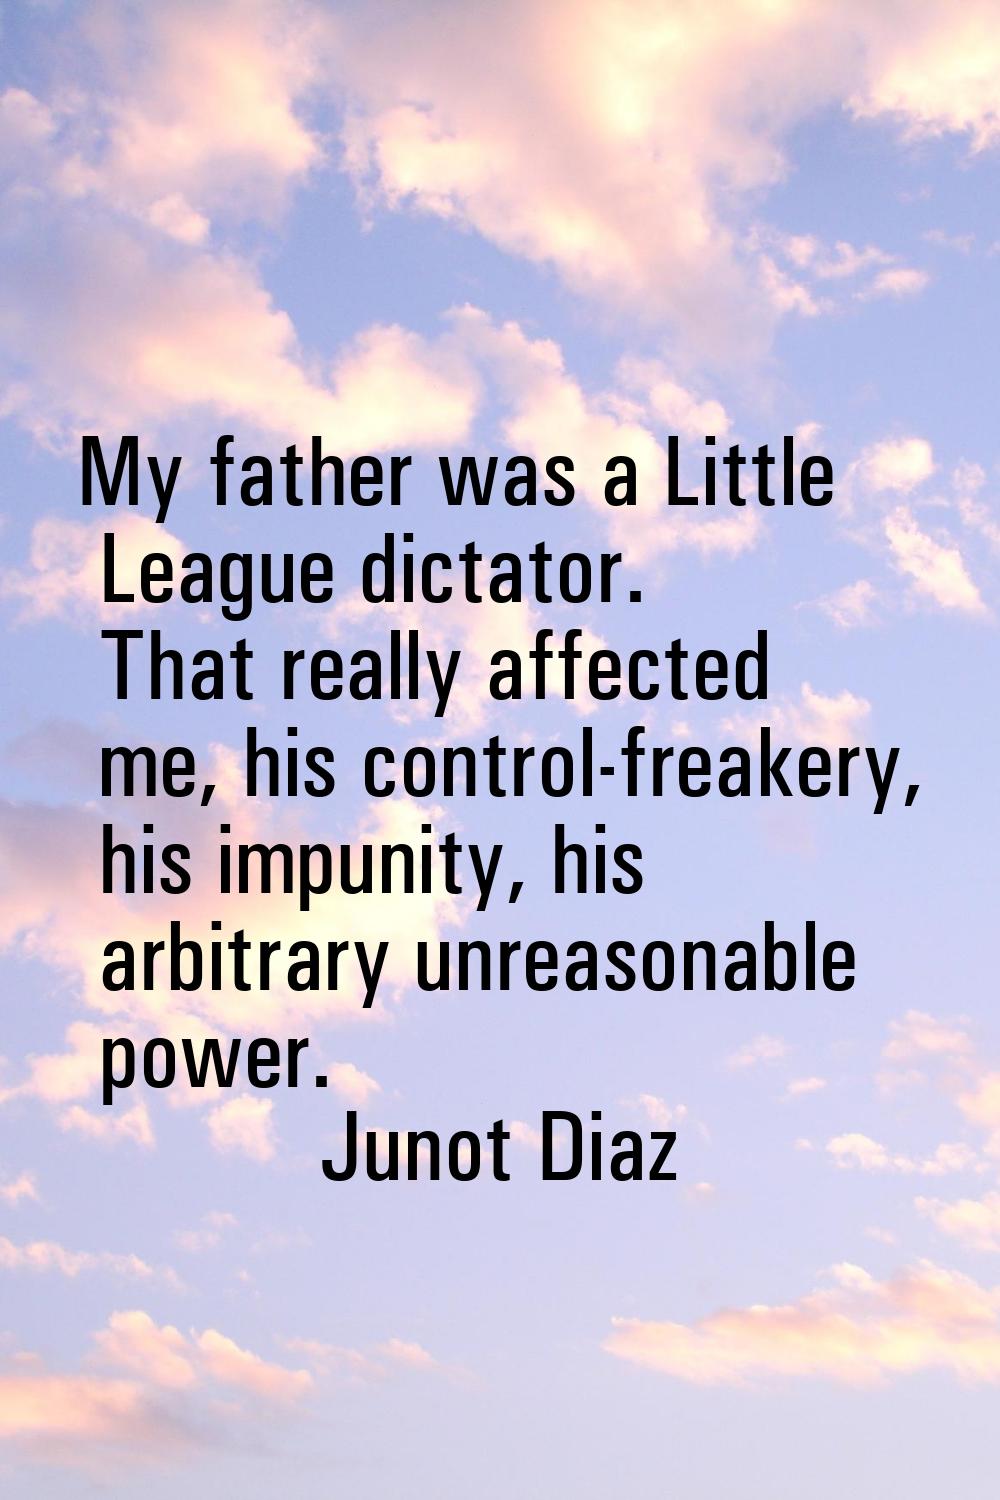 My father was a Little League dictator. That really affected me, his control-freakery, his impunity